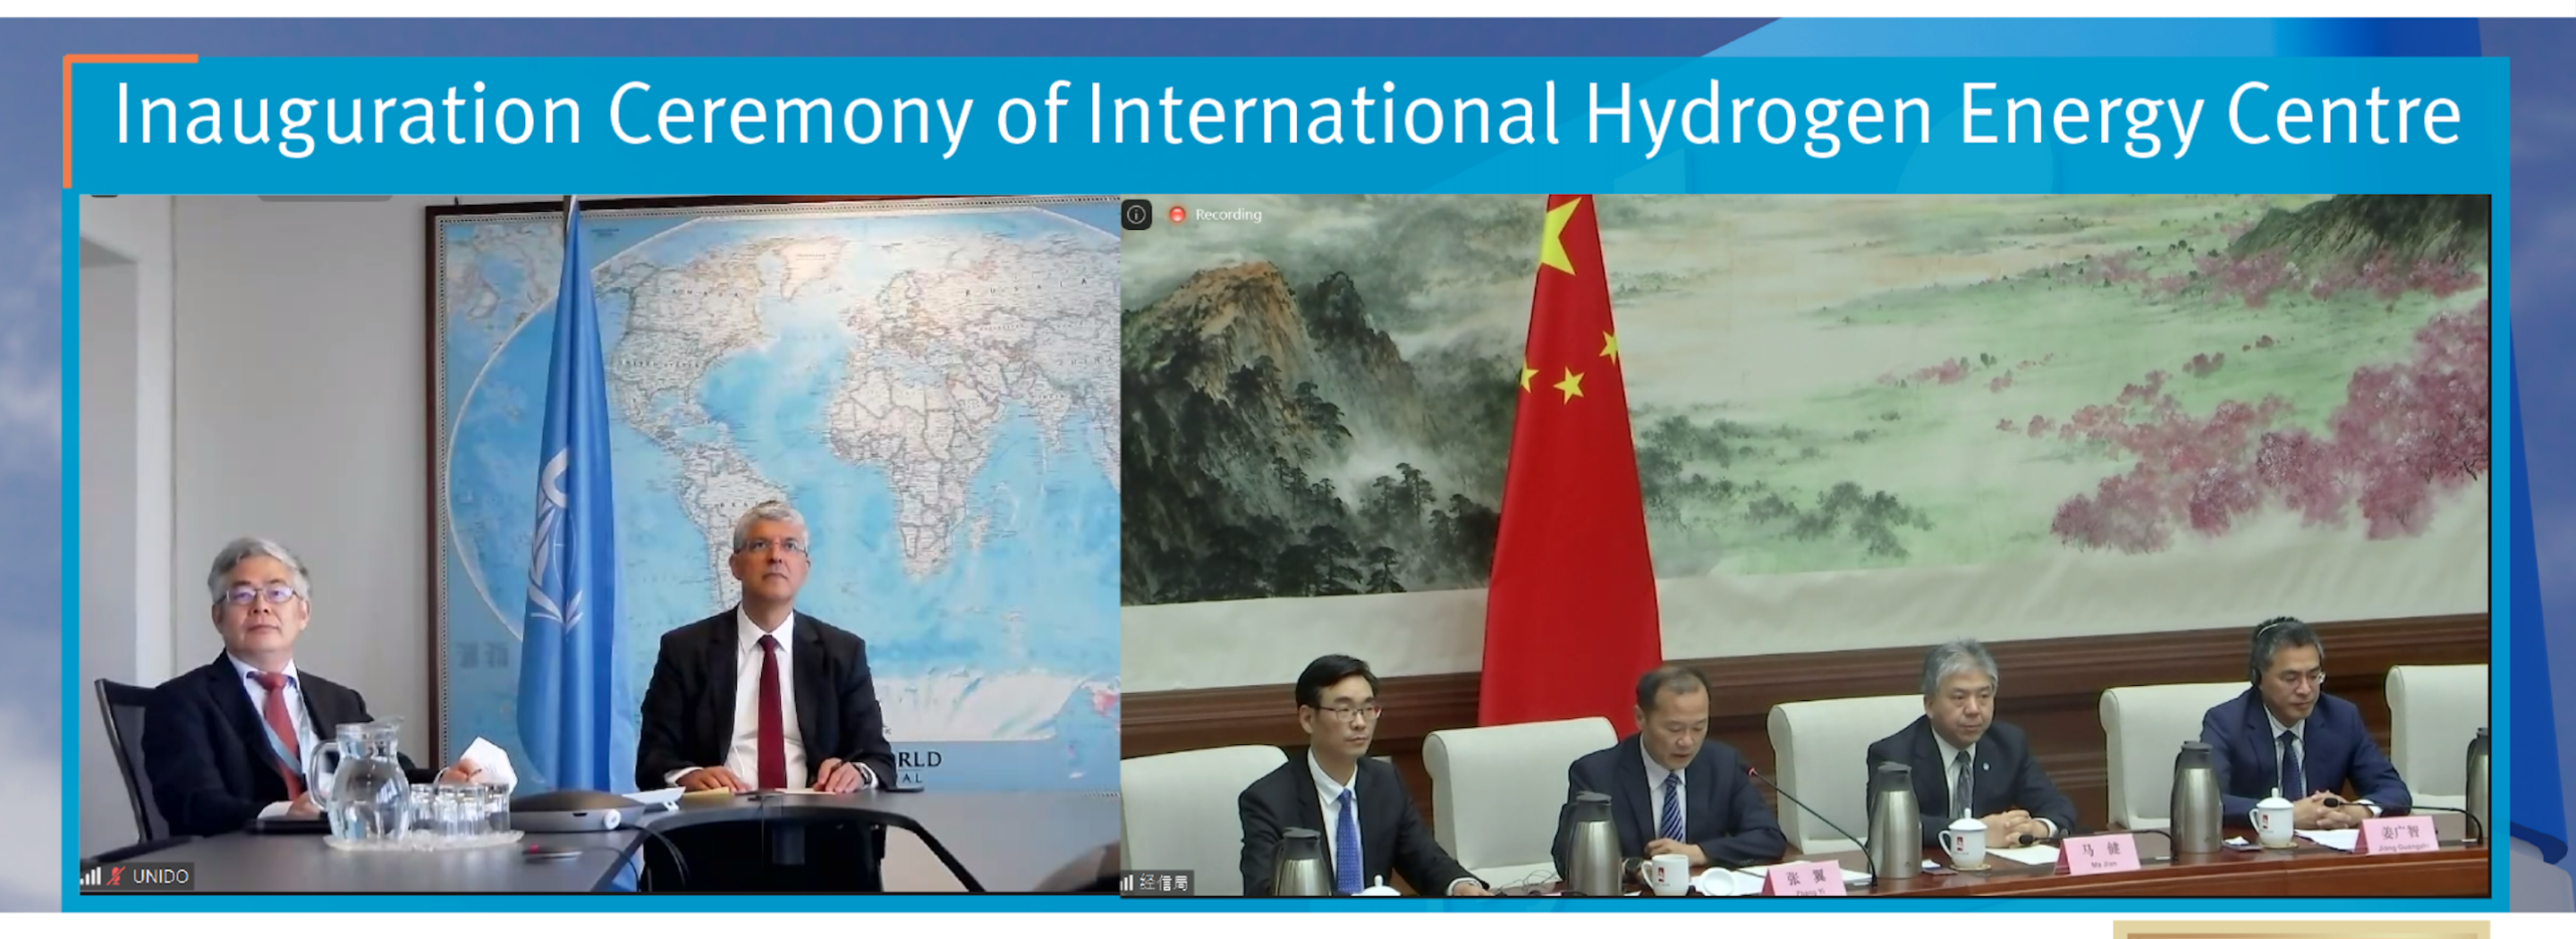 Launch of the International Hydrogen Energy Centre (IHEC)